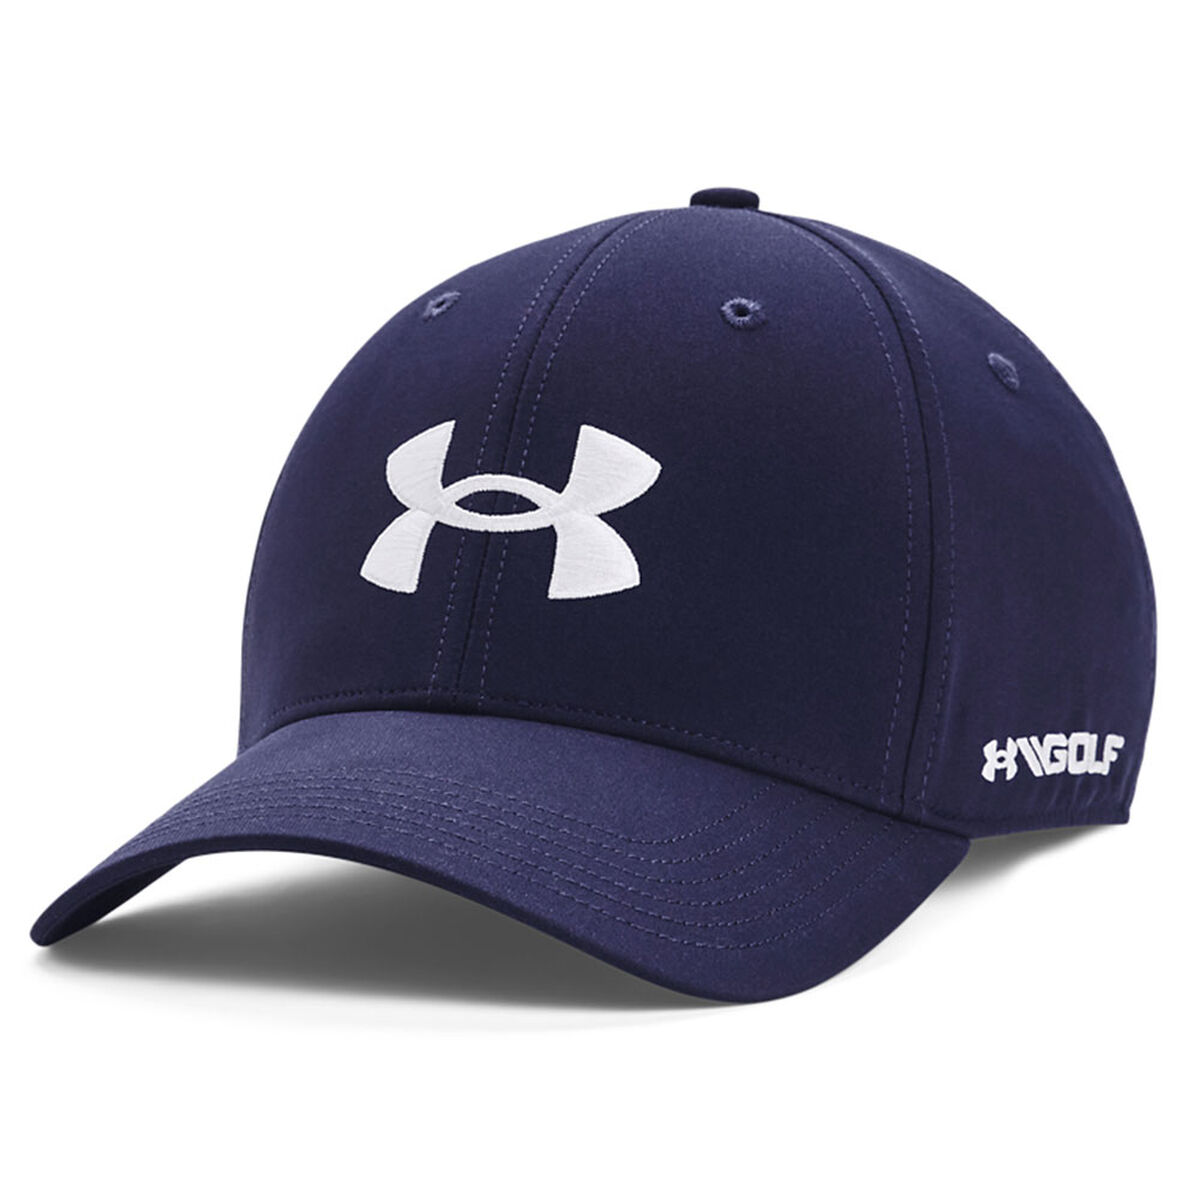 Under Armour Men’s Navy Blue and White Lightweight 96 Golf Cap | American Golf, One Size